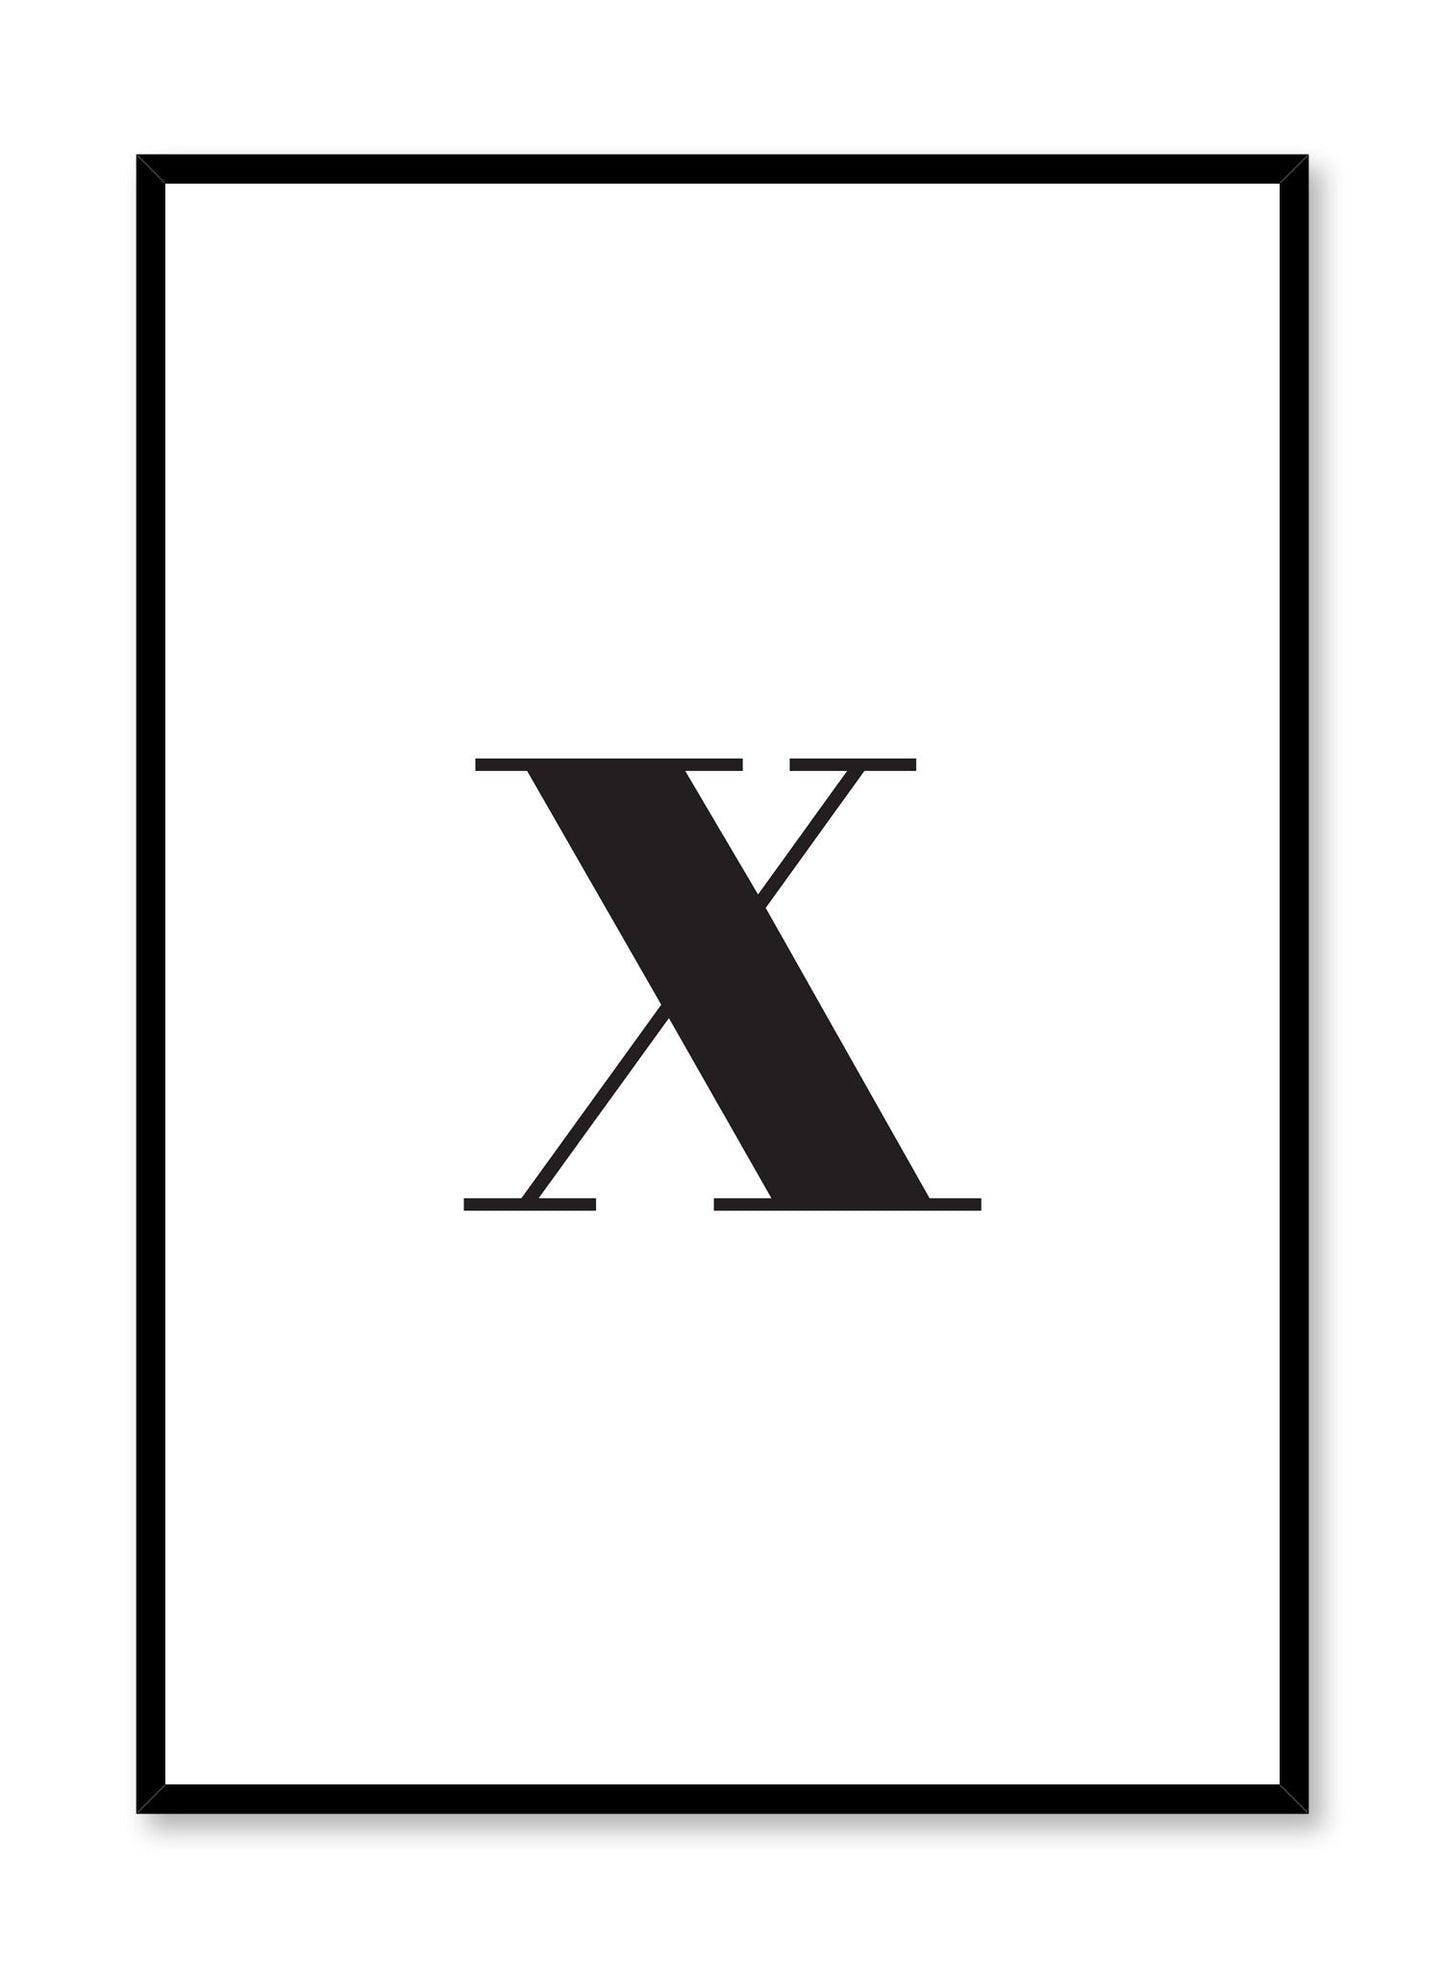 Scandinavian poster with black and white graphic typography design of lowercase letter X by Opposite Wall